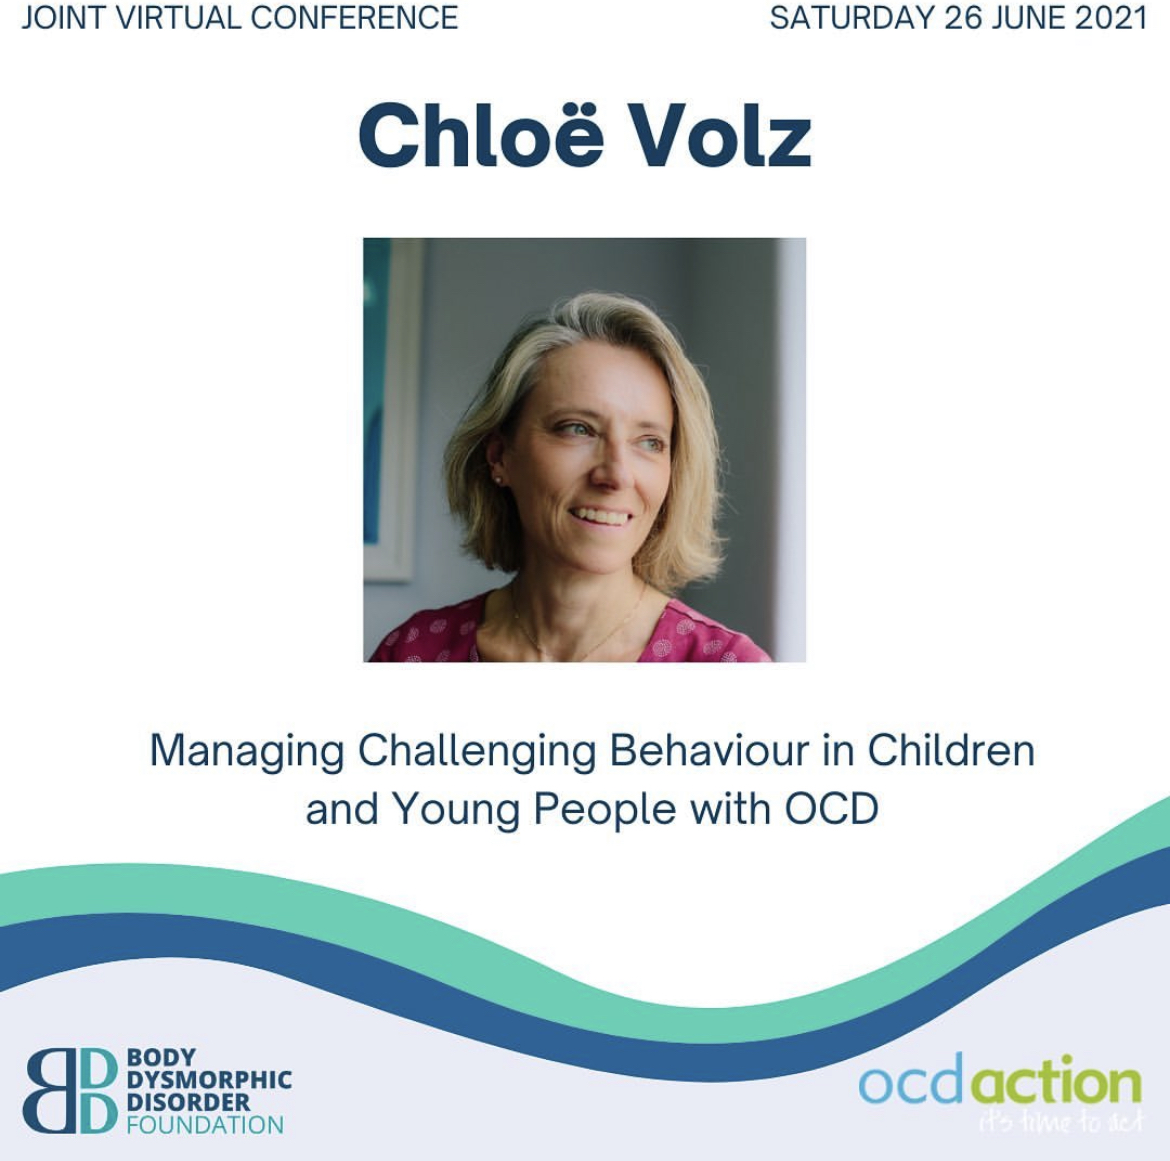 Managing challenging behaviour in children & young people with OCD/BDD